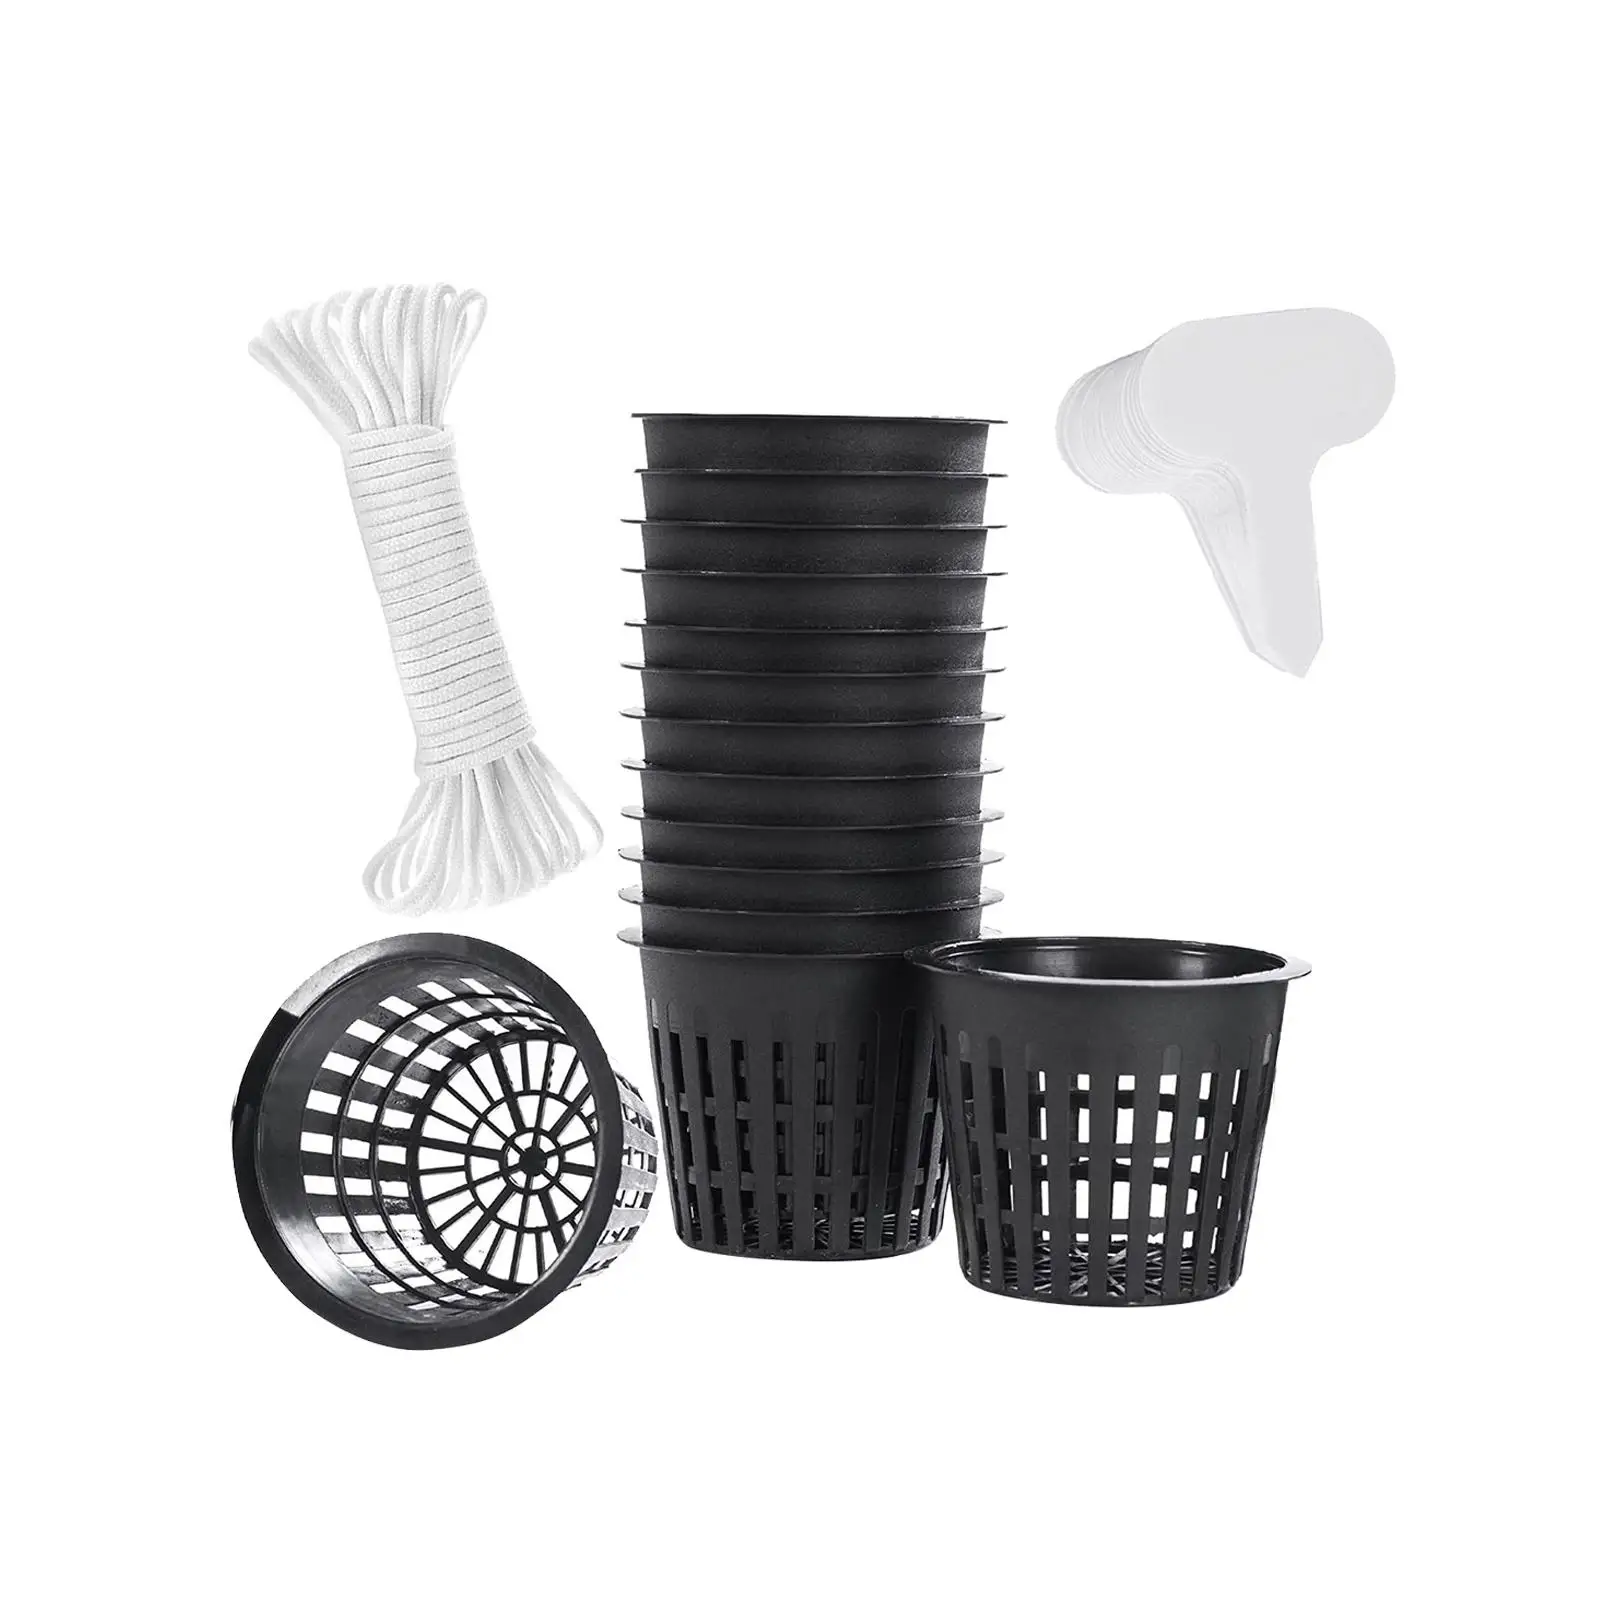 Net Cups Pots with Self Watering Wick Nursery Pots Plant Cultivation Basket for Hydroponics Growing Garden Gardening Greenhouse